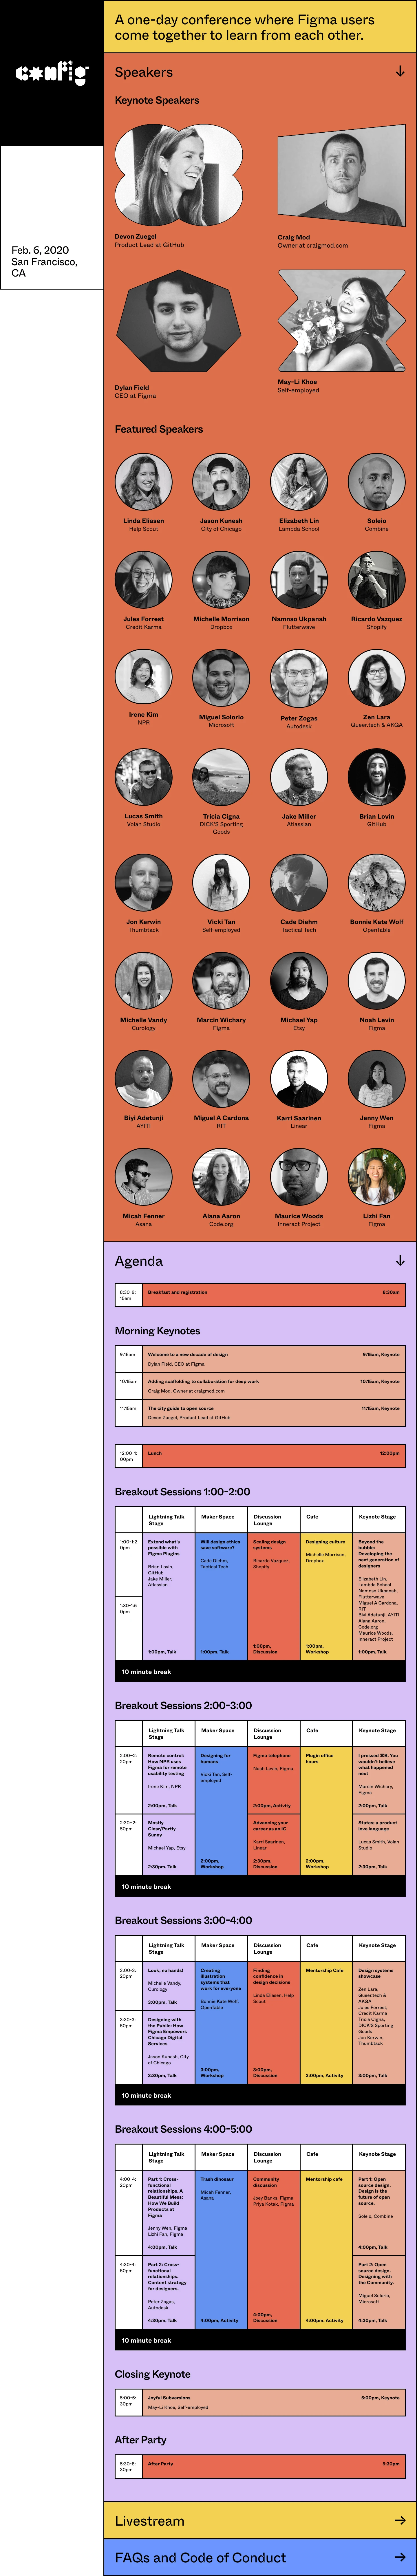 Config by Figma Landing Page Example: A one-day conference where Figma users come together to learn from each other. Feb. 6, 2020, San Francisco, CA